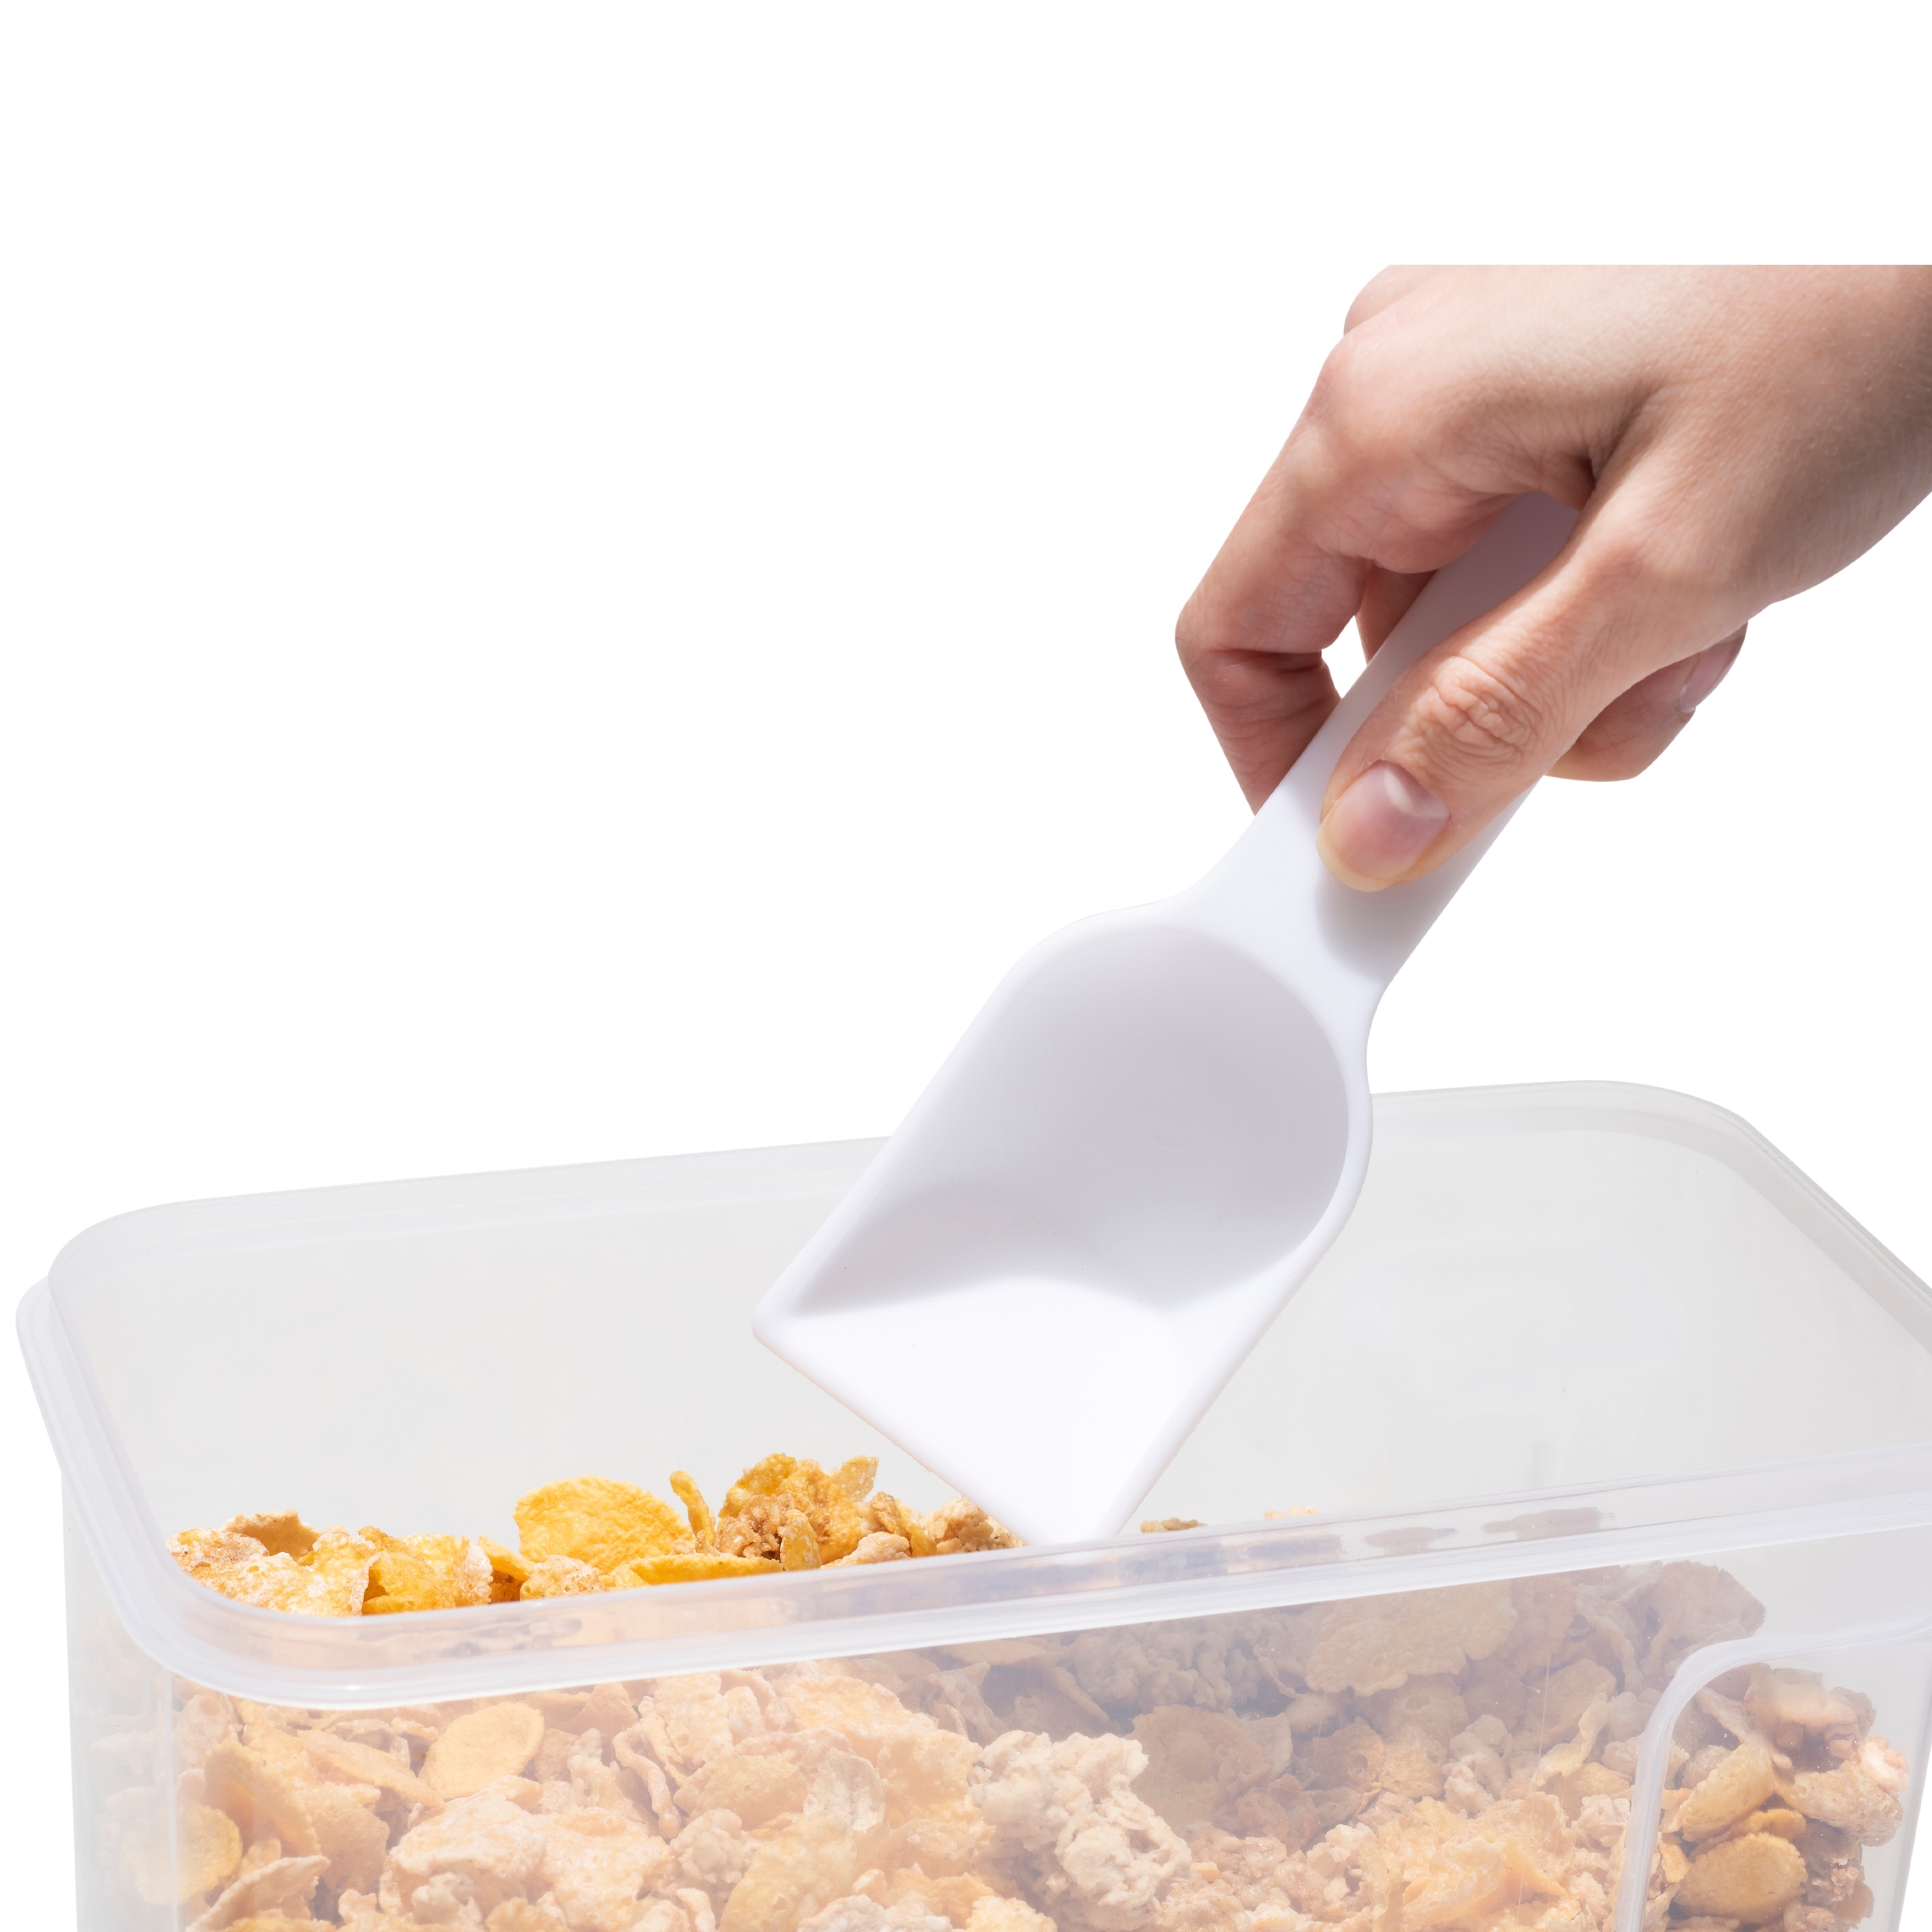 https://ak1.ostkcdn.com/images/products/is/images/direct/0f85a85bad8461c05498c190a854d8ebd6b0f227/Kitchen-Details-2-Pack-Airtight-Cereal-Container-with-Scooper.jpg